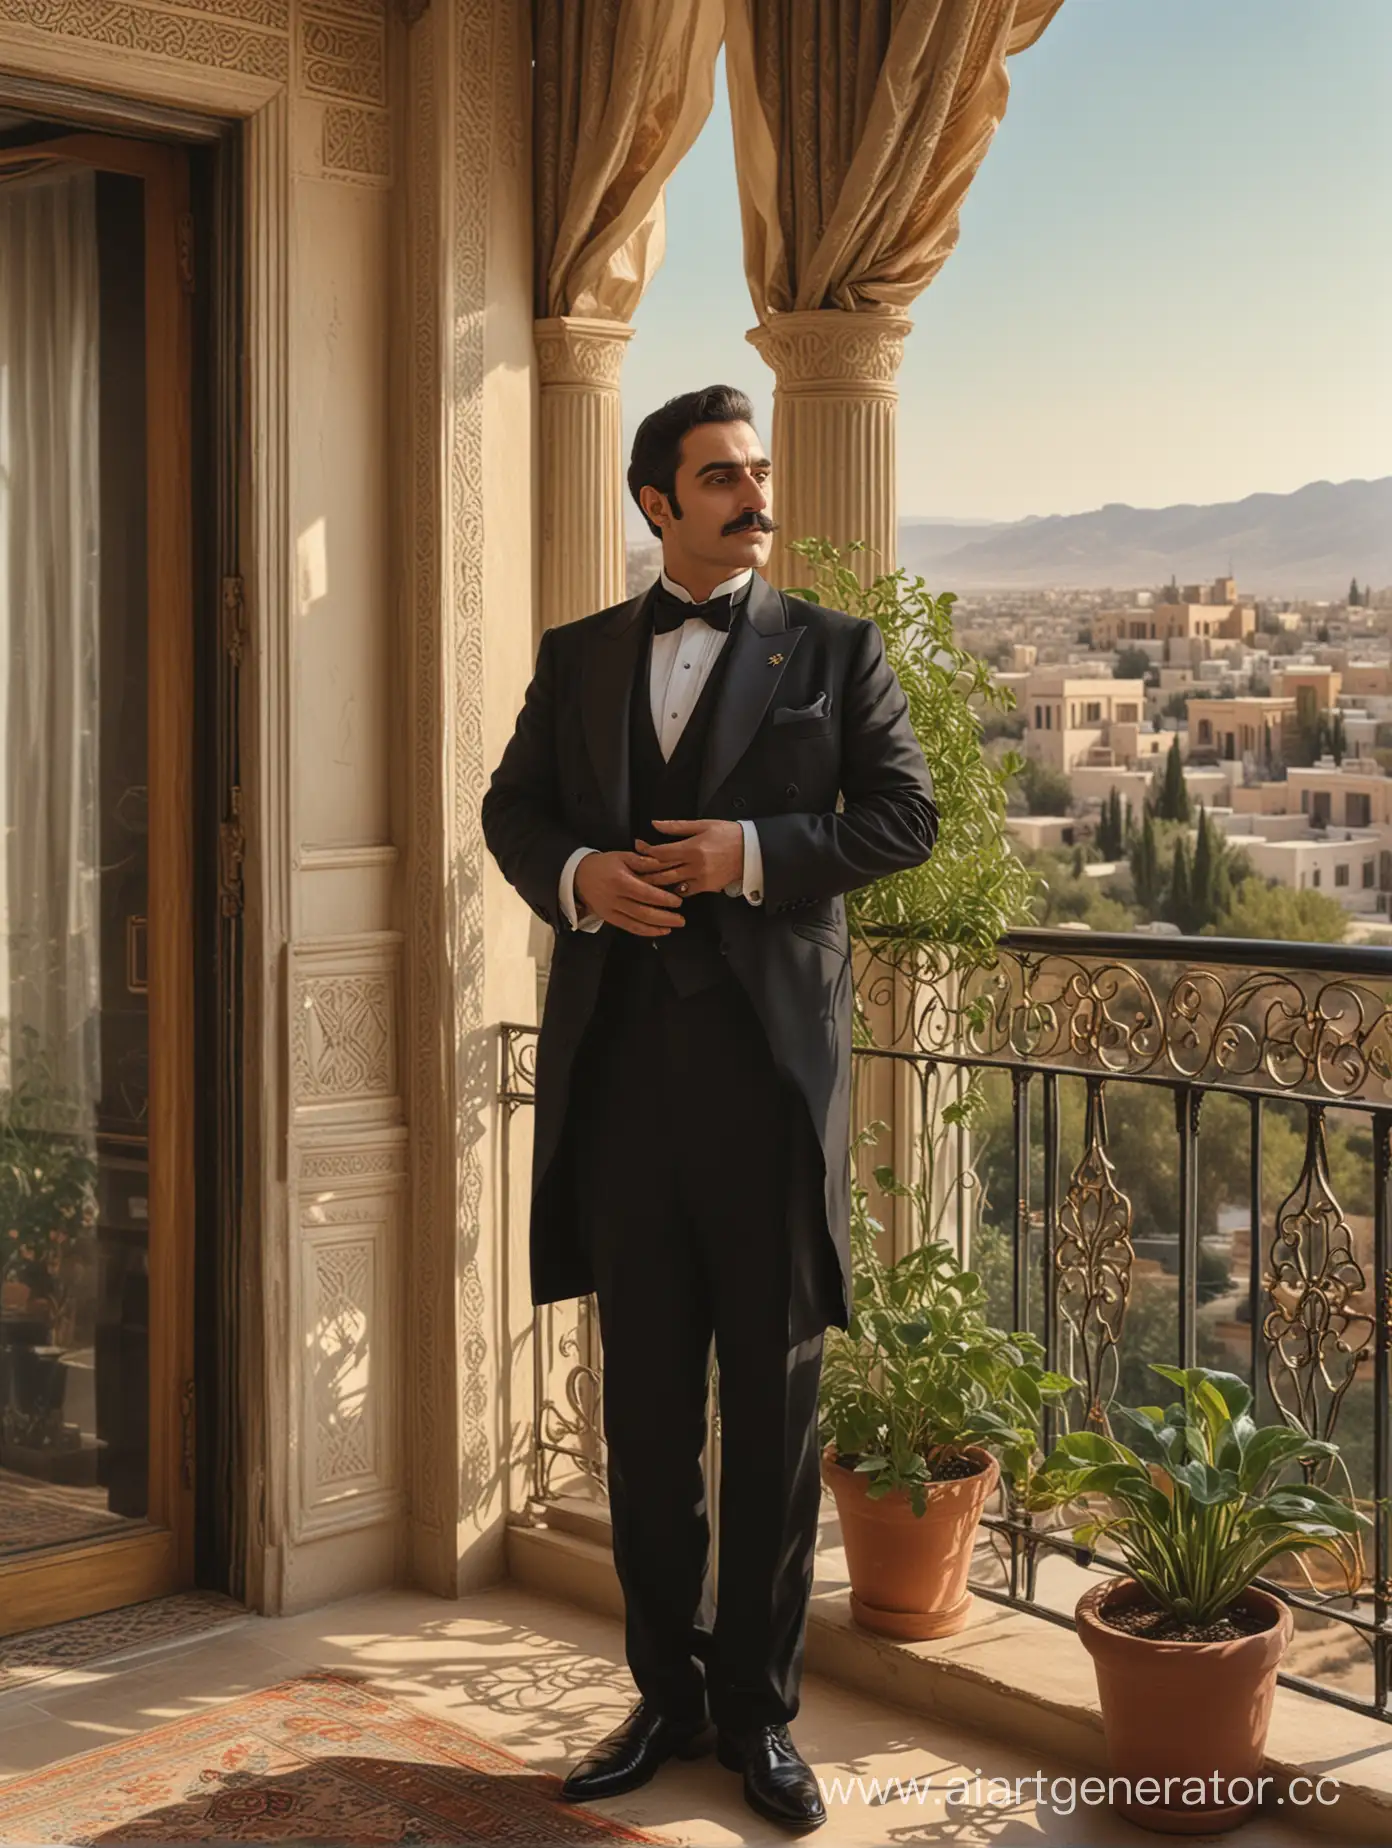 Sophisticated-Gentleman-Contemplating-on-Luxurious-Balcony-with-Qajar-Art-Influence